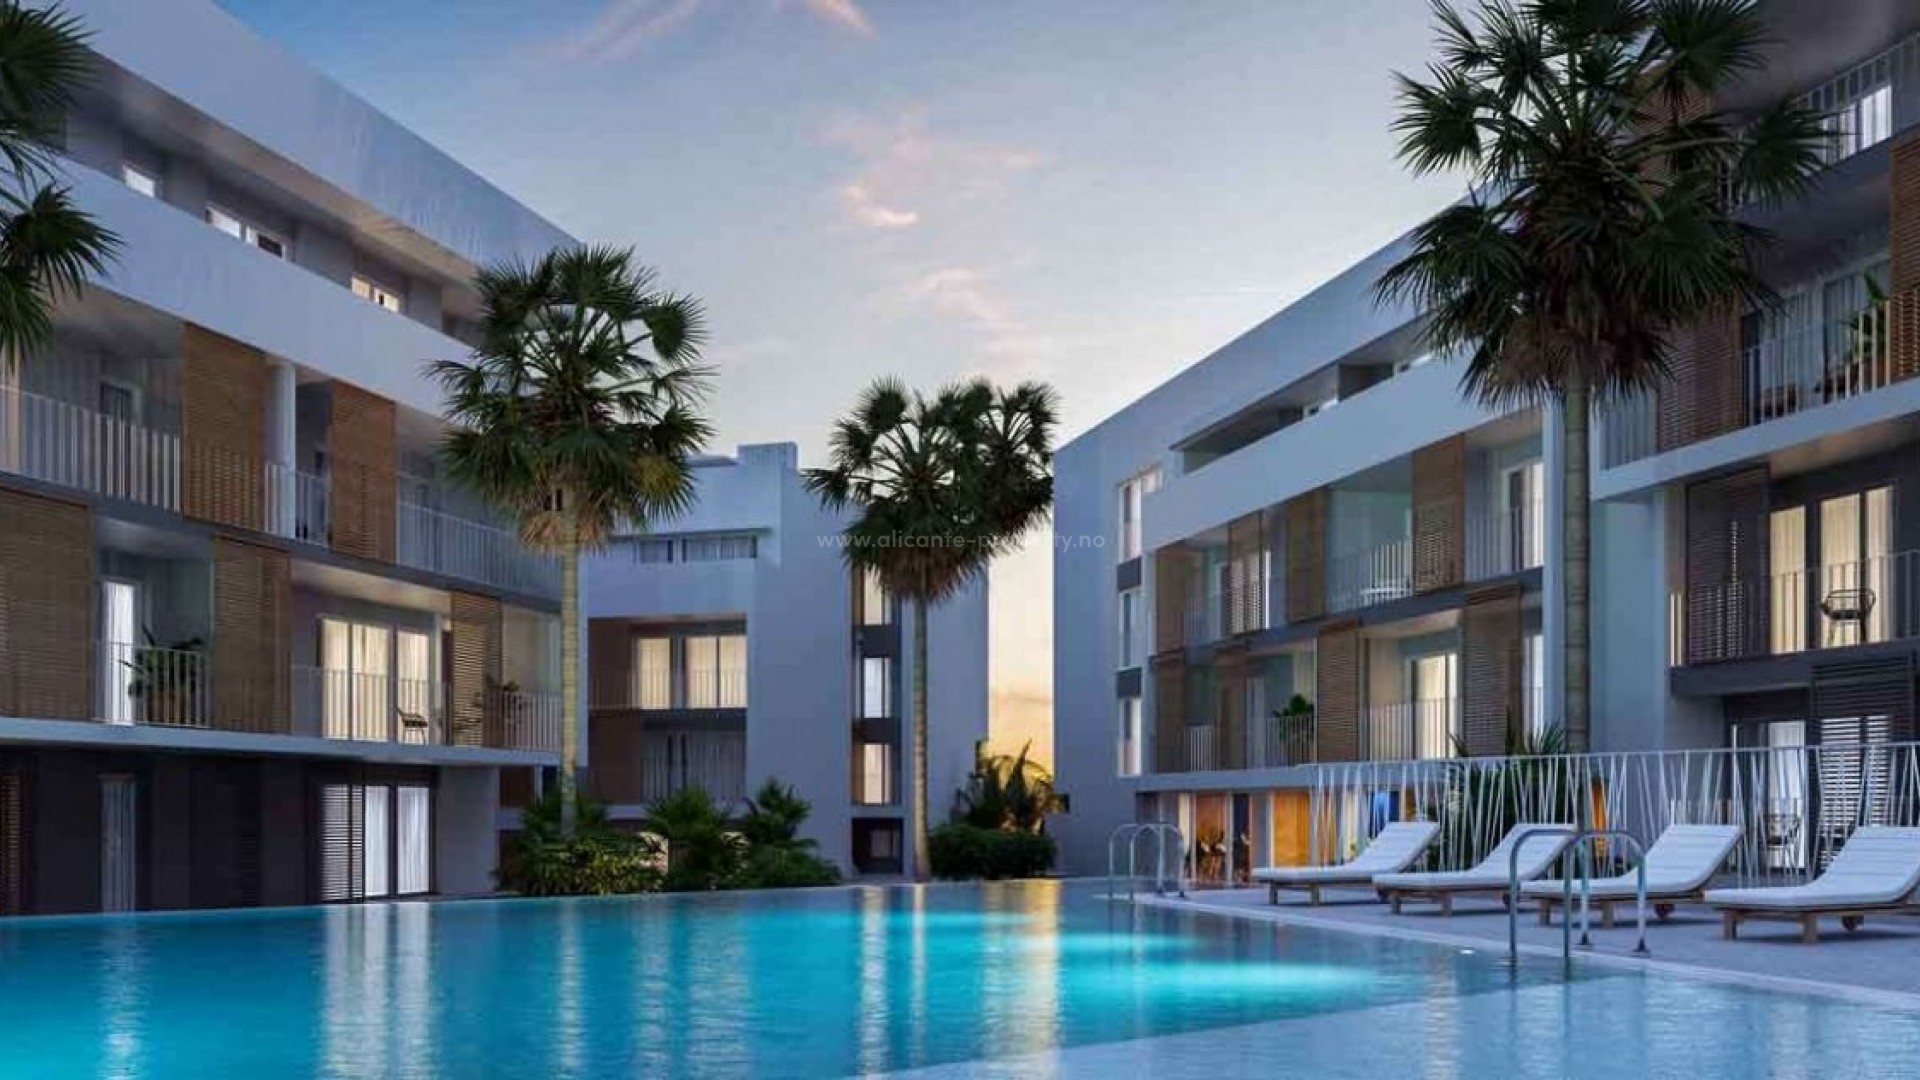 New apartments in Javea 5 minutes from the beach and harbour, 2/3/4 bedrooms, 2 bathrooms, communal swimming pool and own social club. Garage and storage room